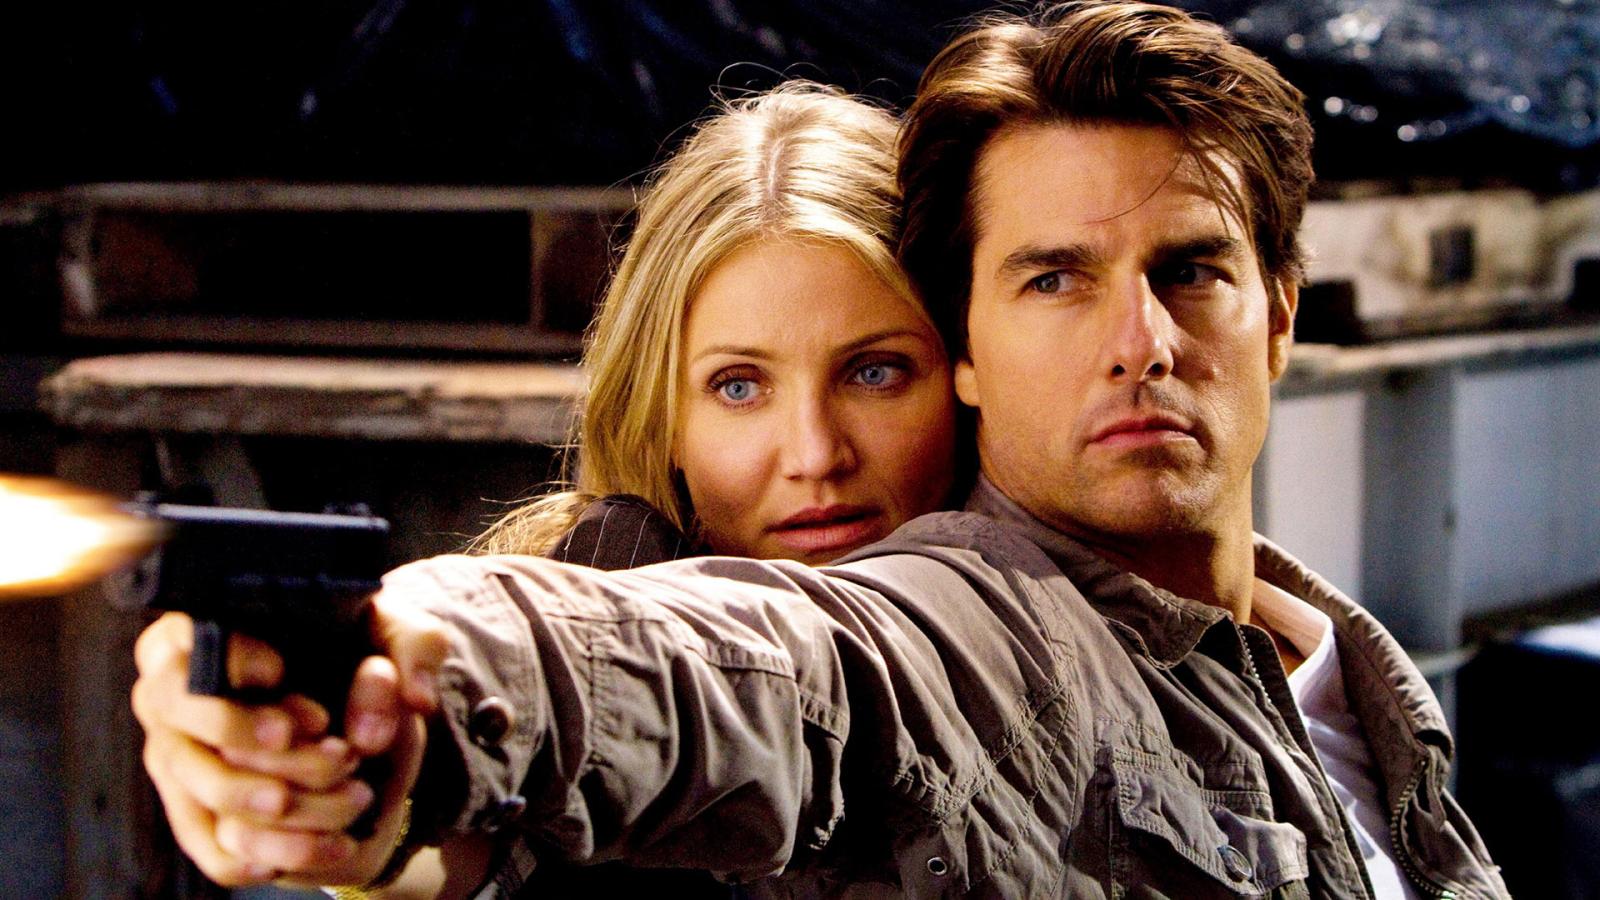 10 Action Comedies from the 2000s That Are Seriously Underrated - image 6